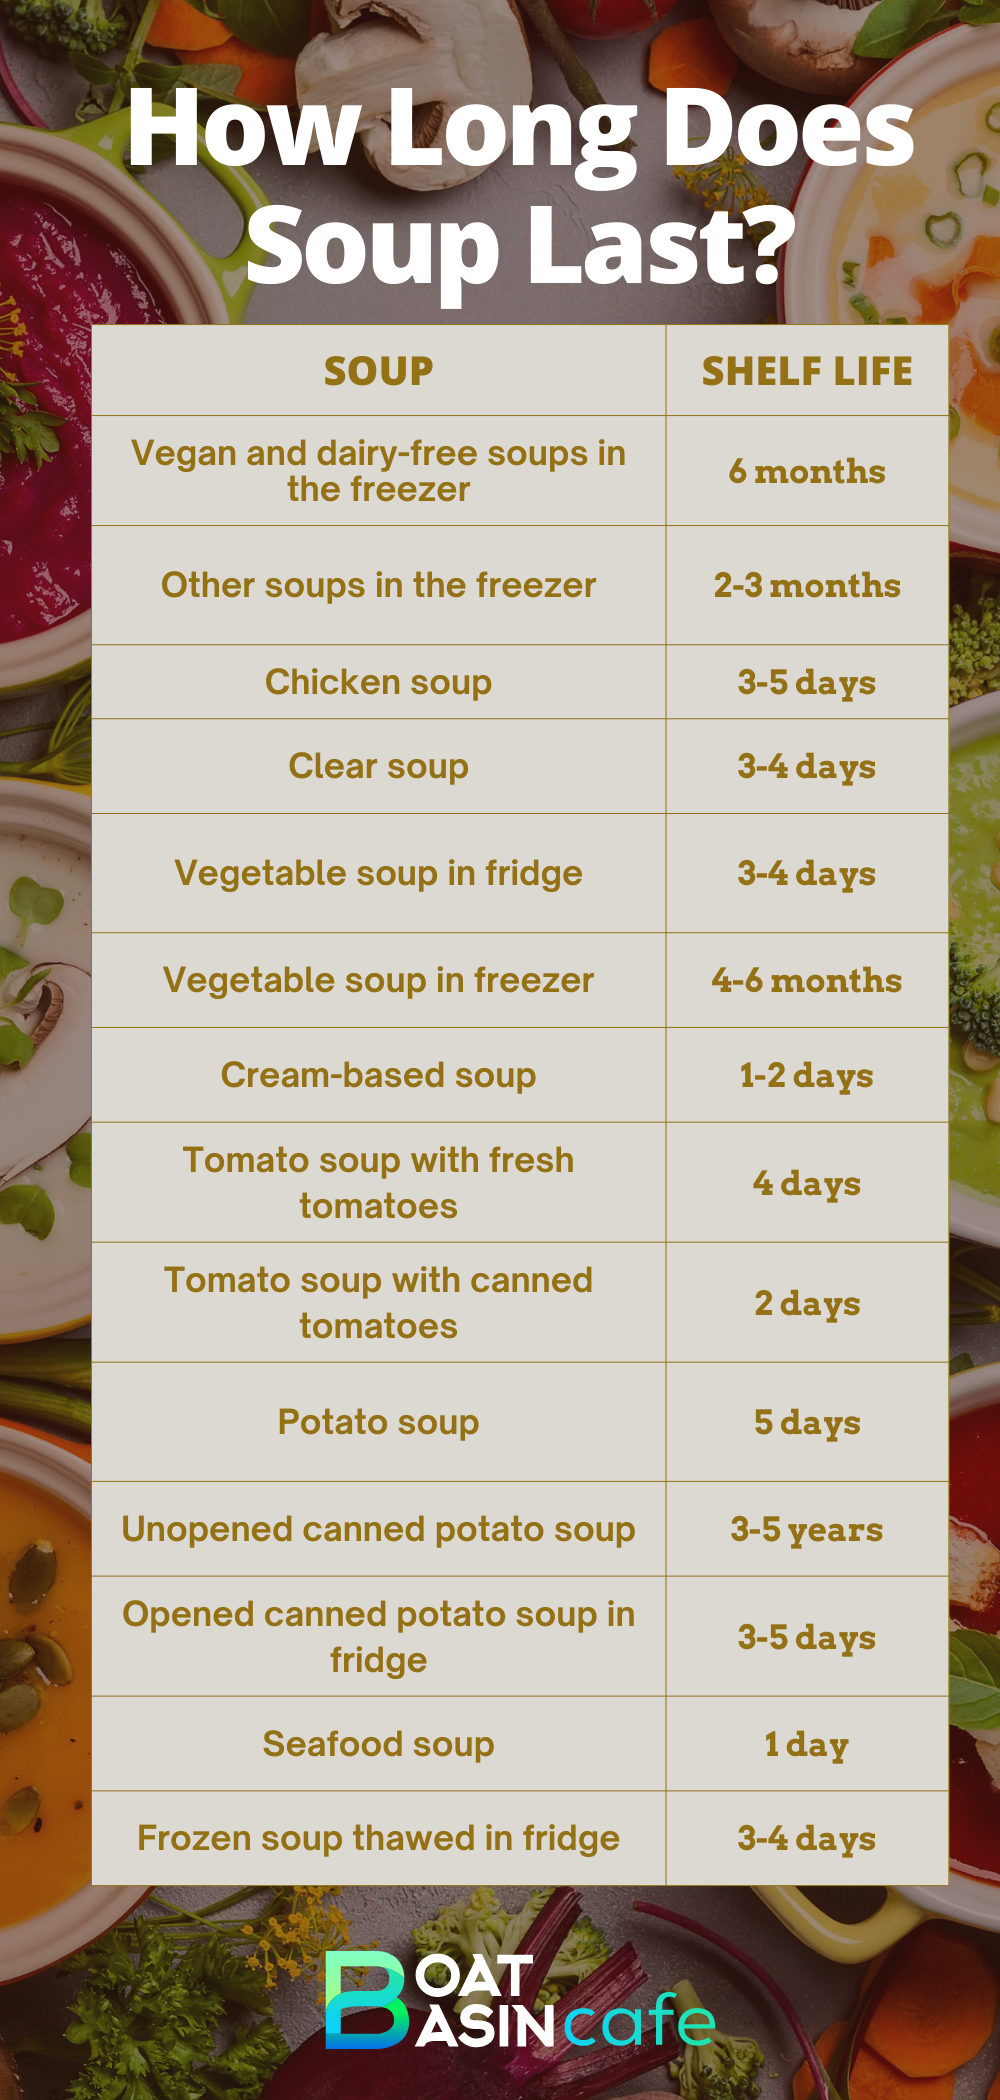 How Long Does Soup Last In The Fridge? 1